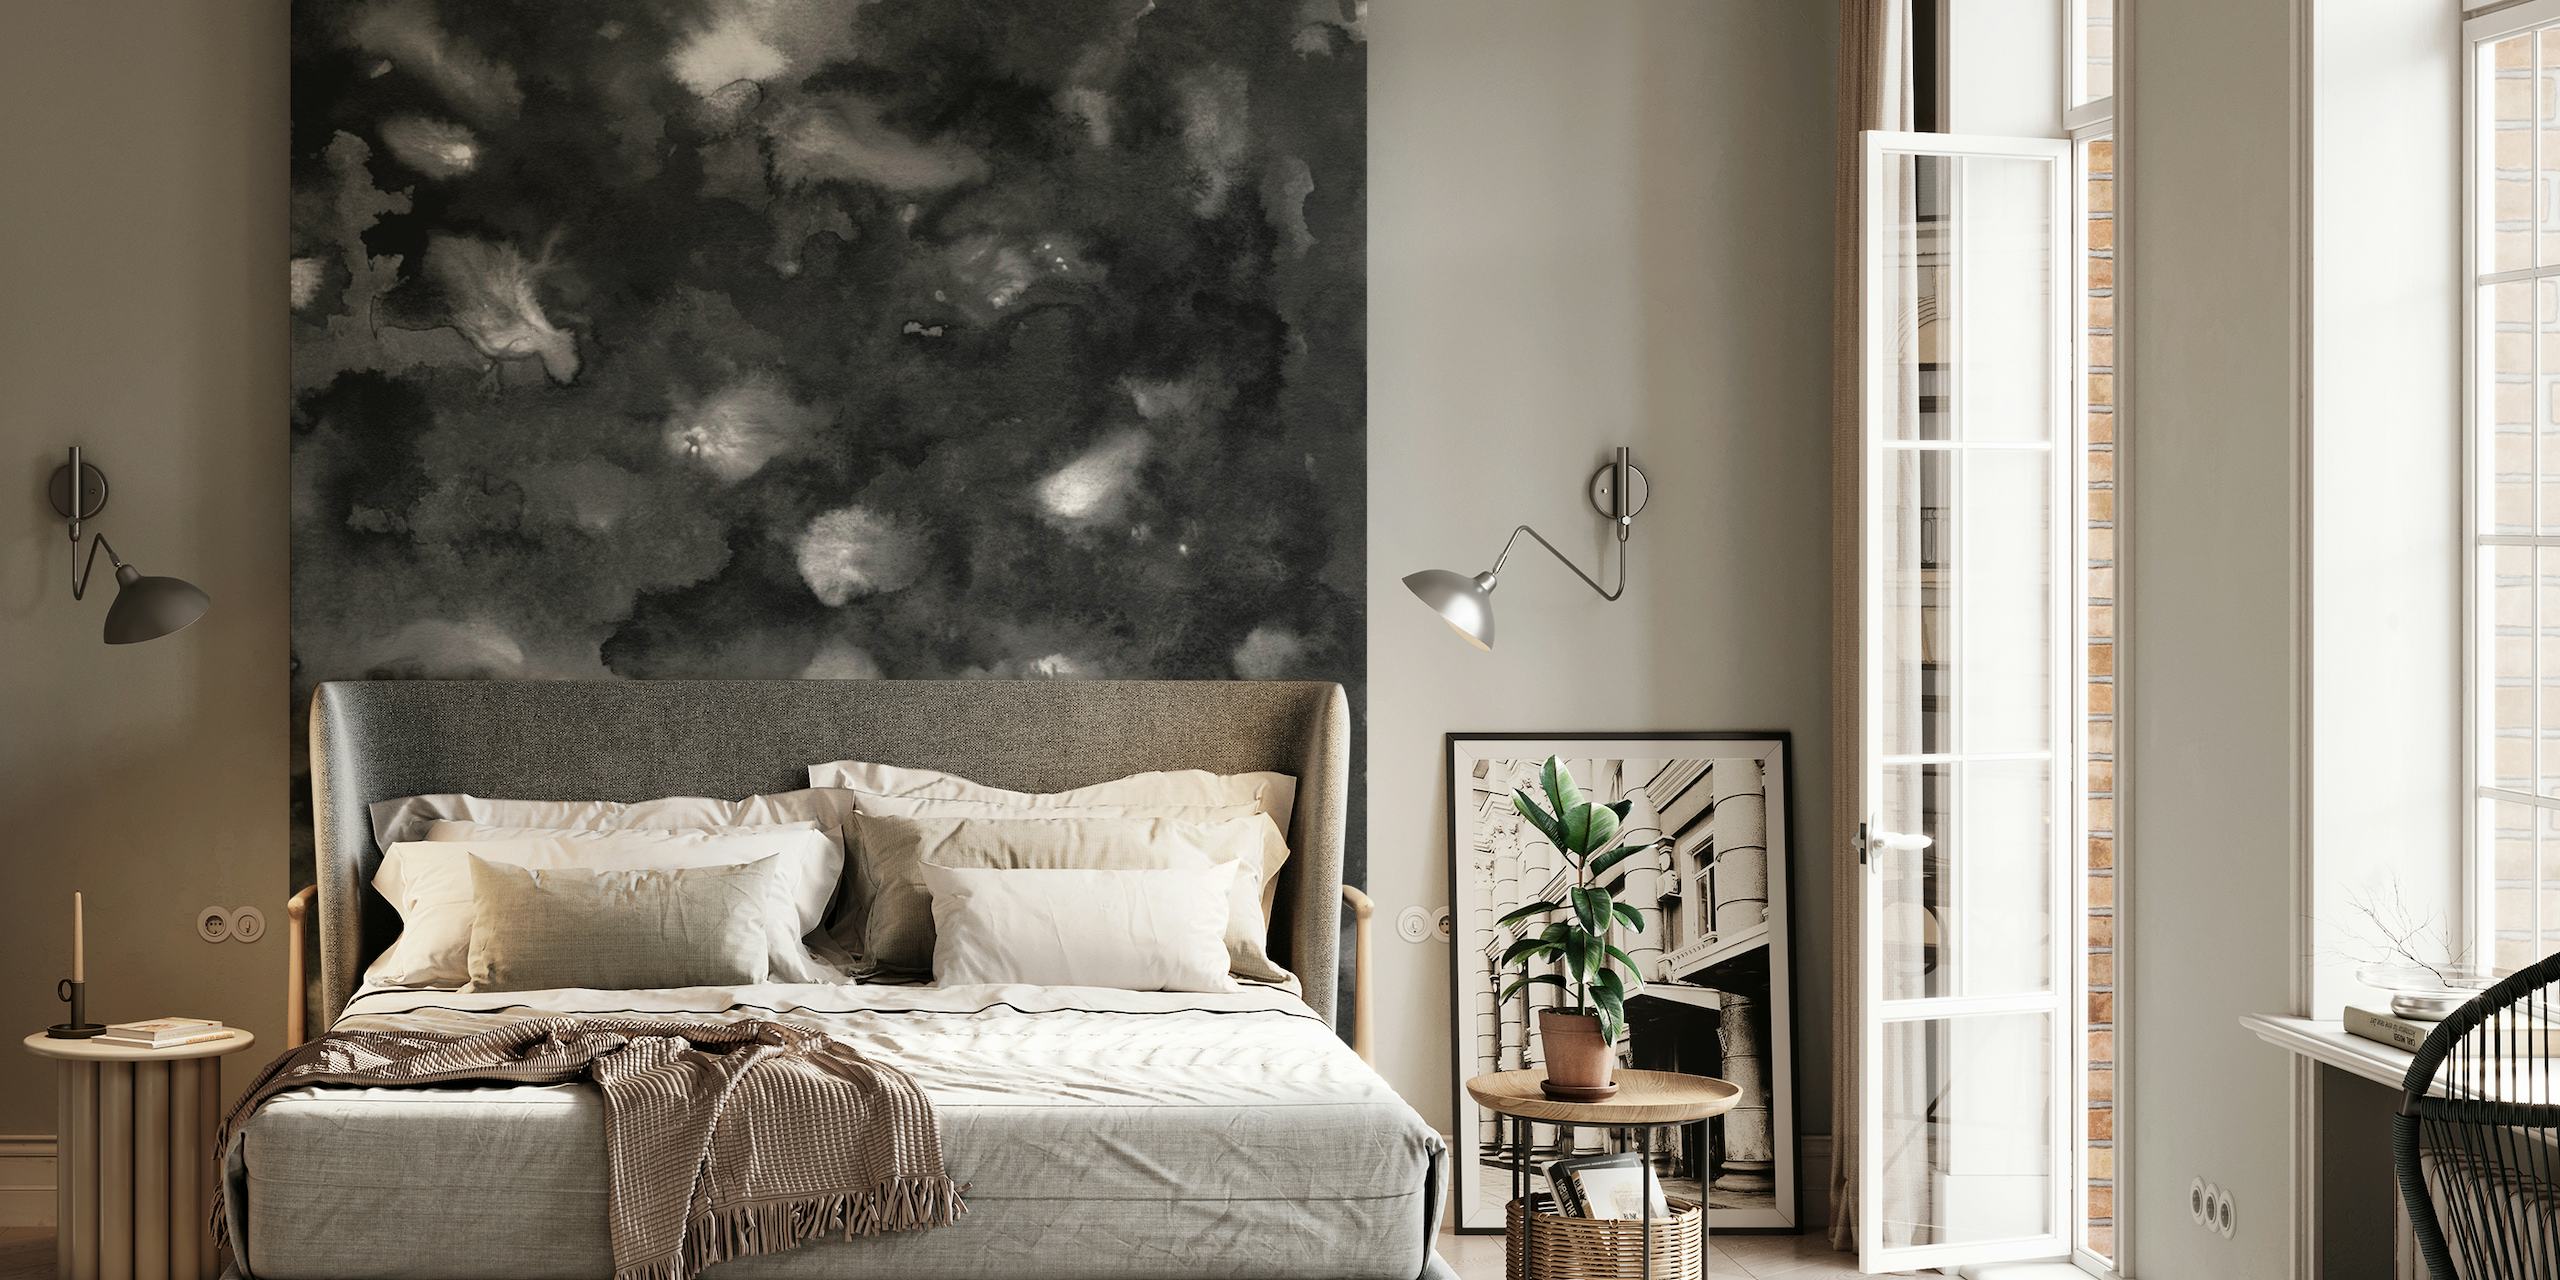 Abstract ocean-inspired wall mural in grayscale with hints of silver highlights